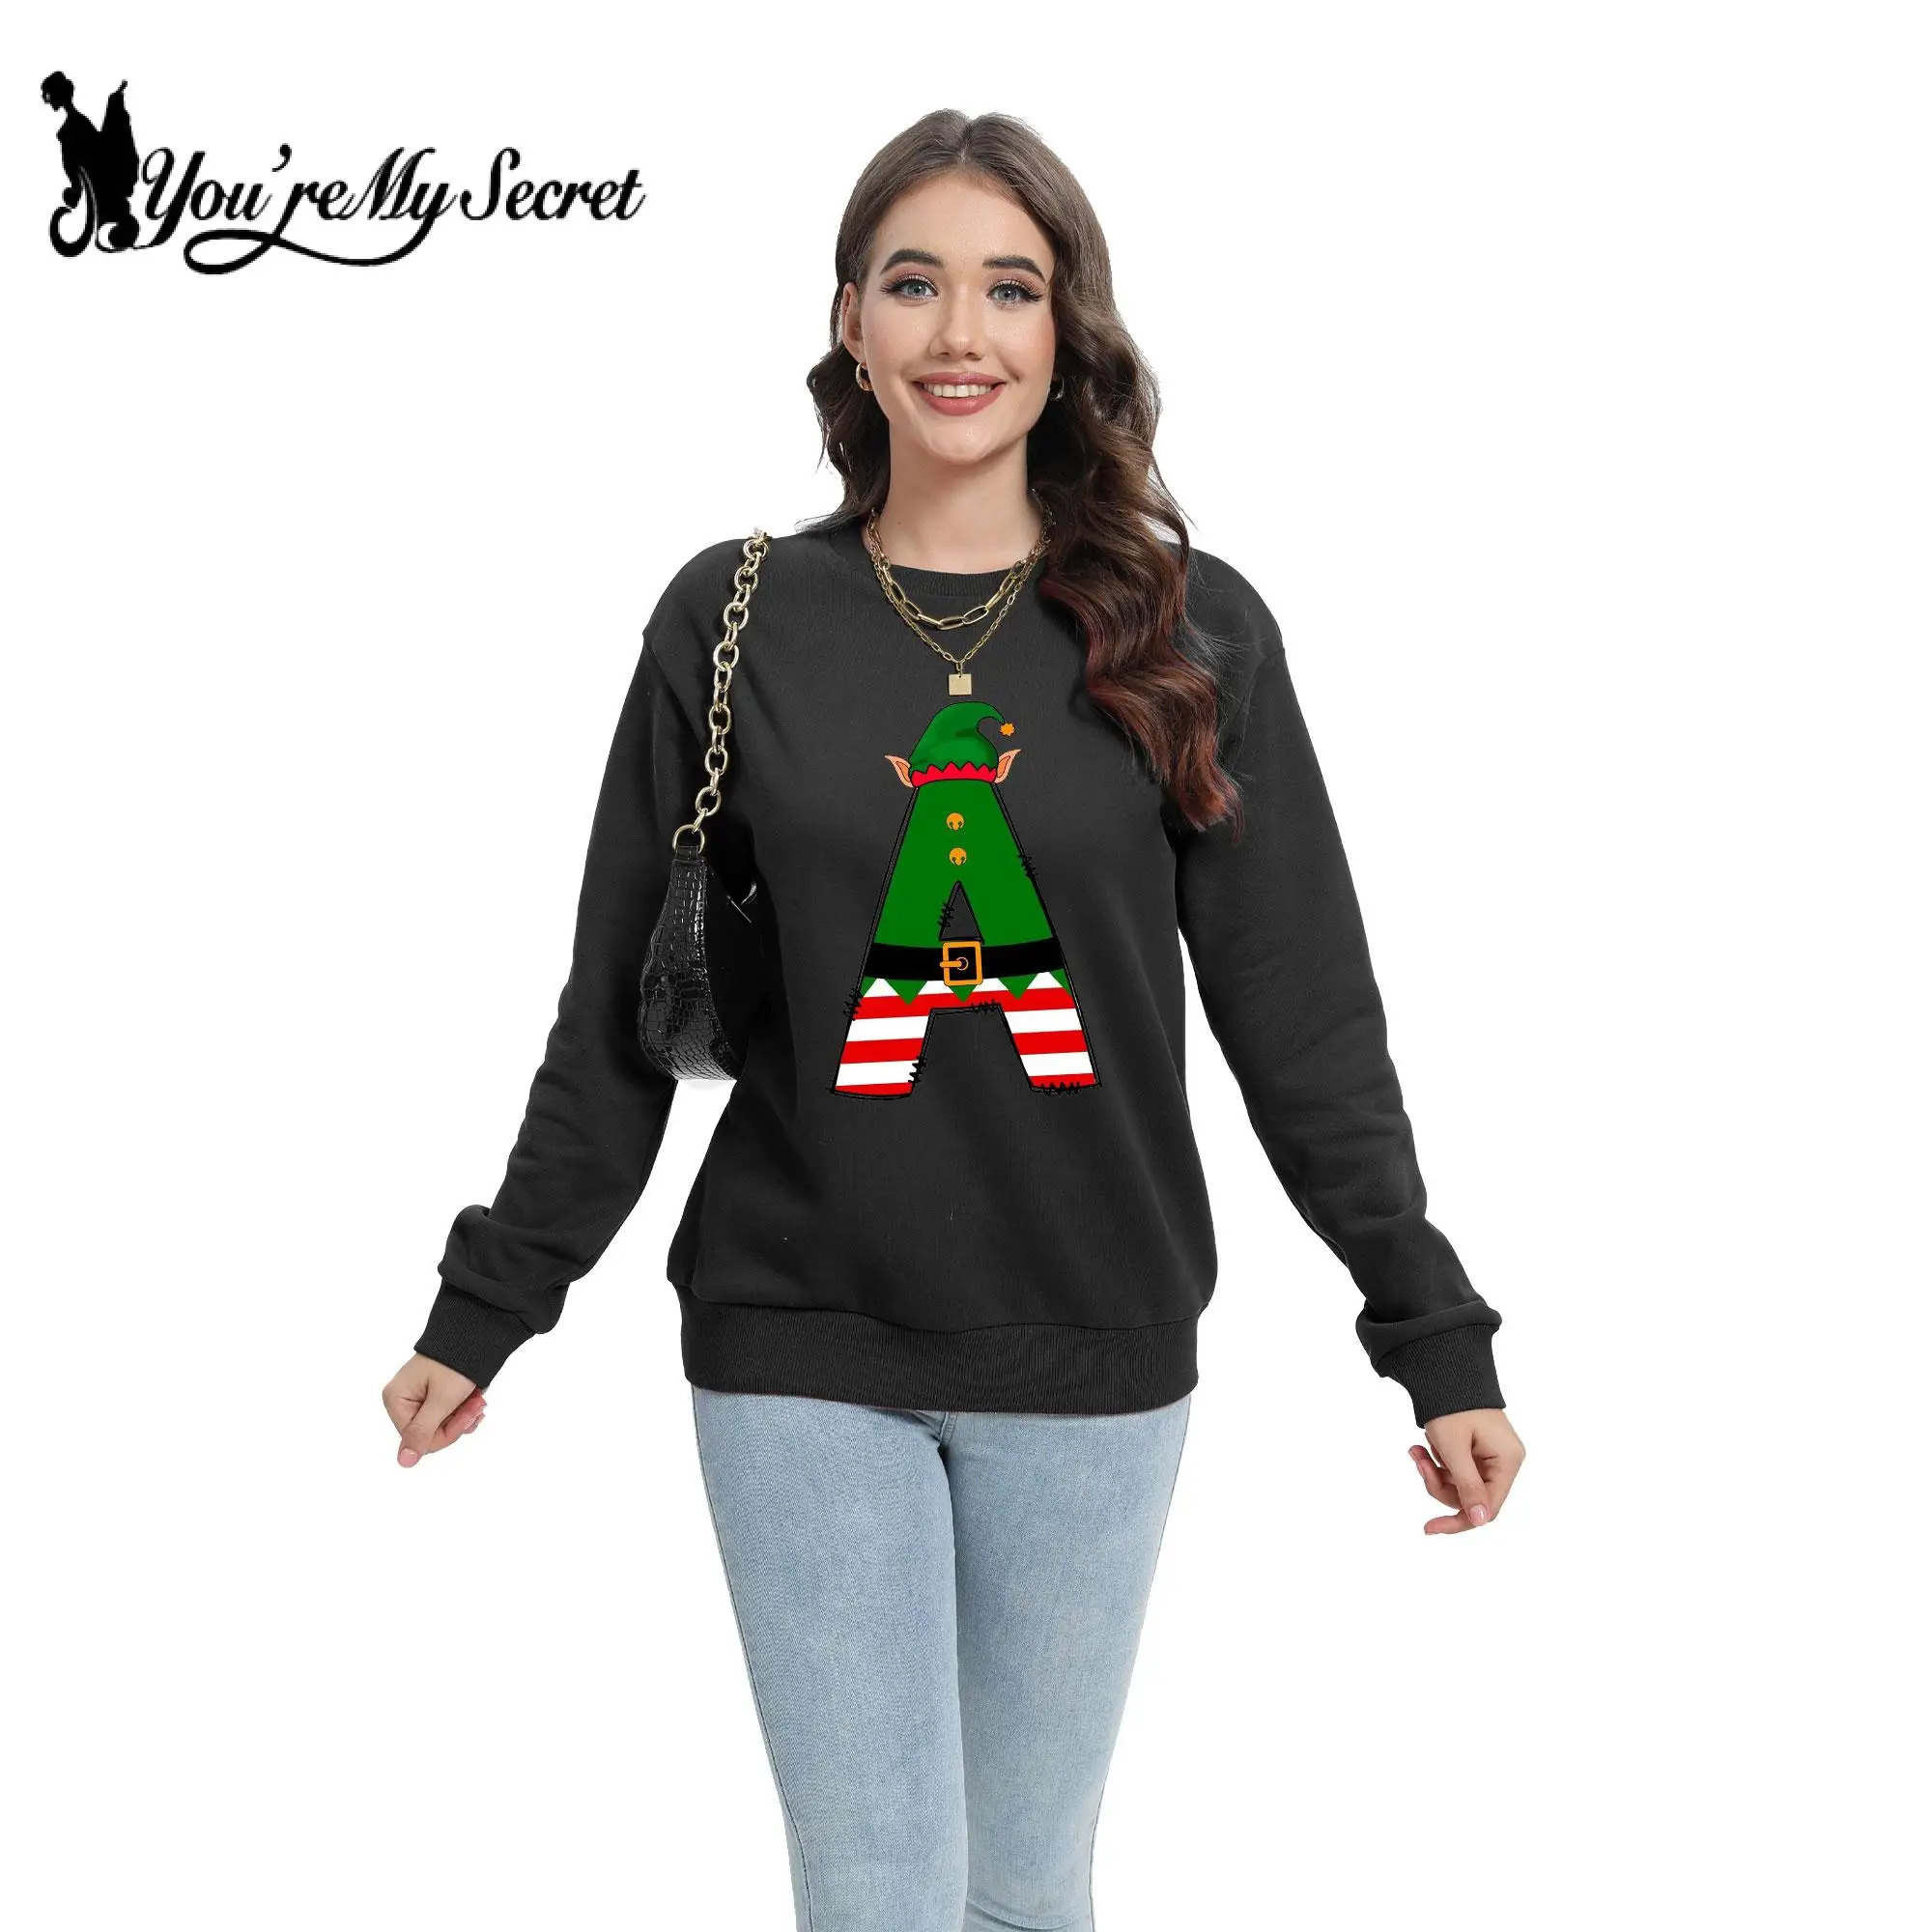 

[You're My Secret] Merry Christmas Holiday Party Casual Hoodies Women Long Sleeve Print Pullover Warm Loose Hoody Clothes